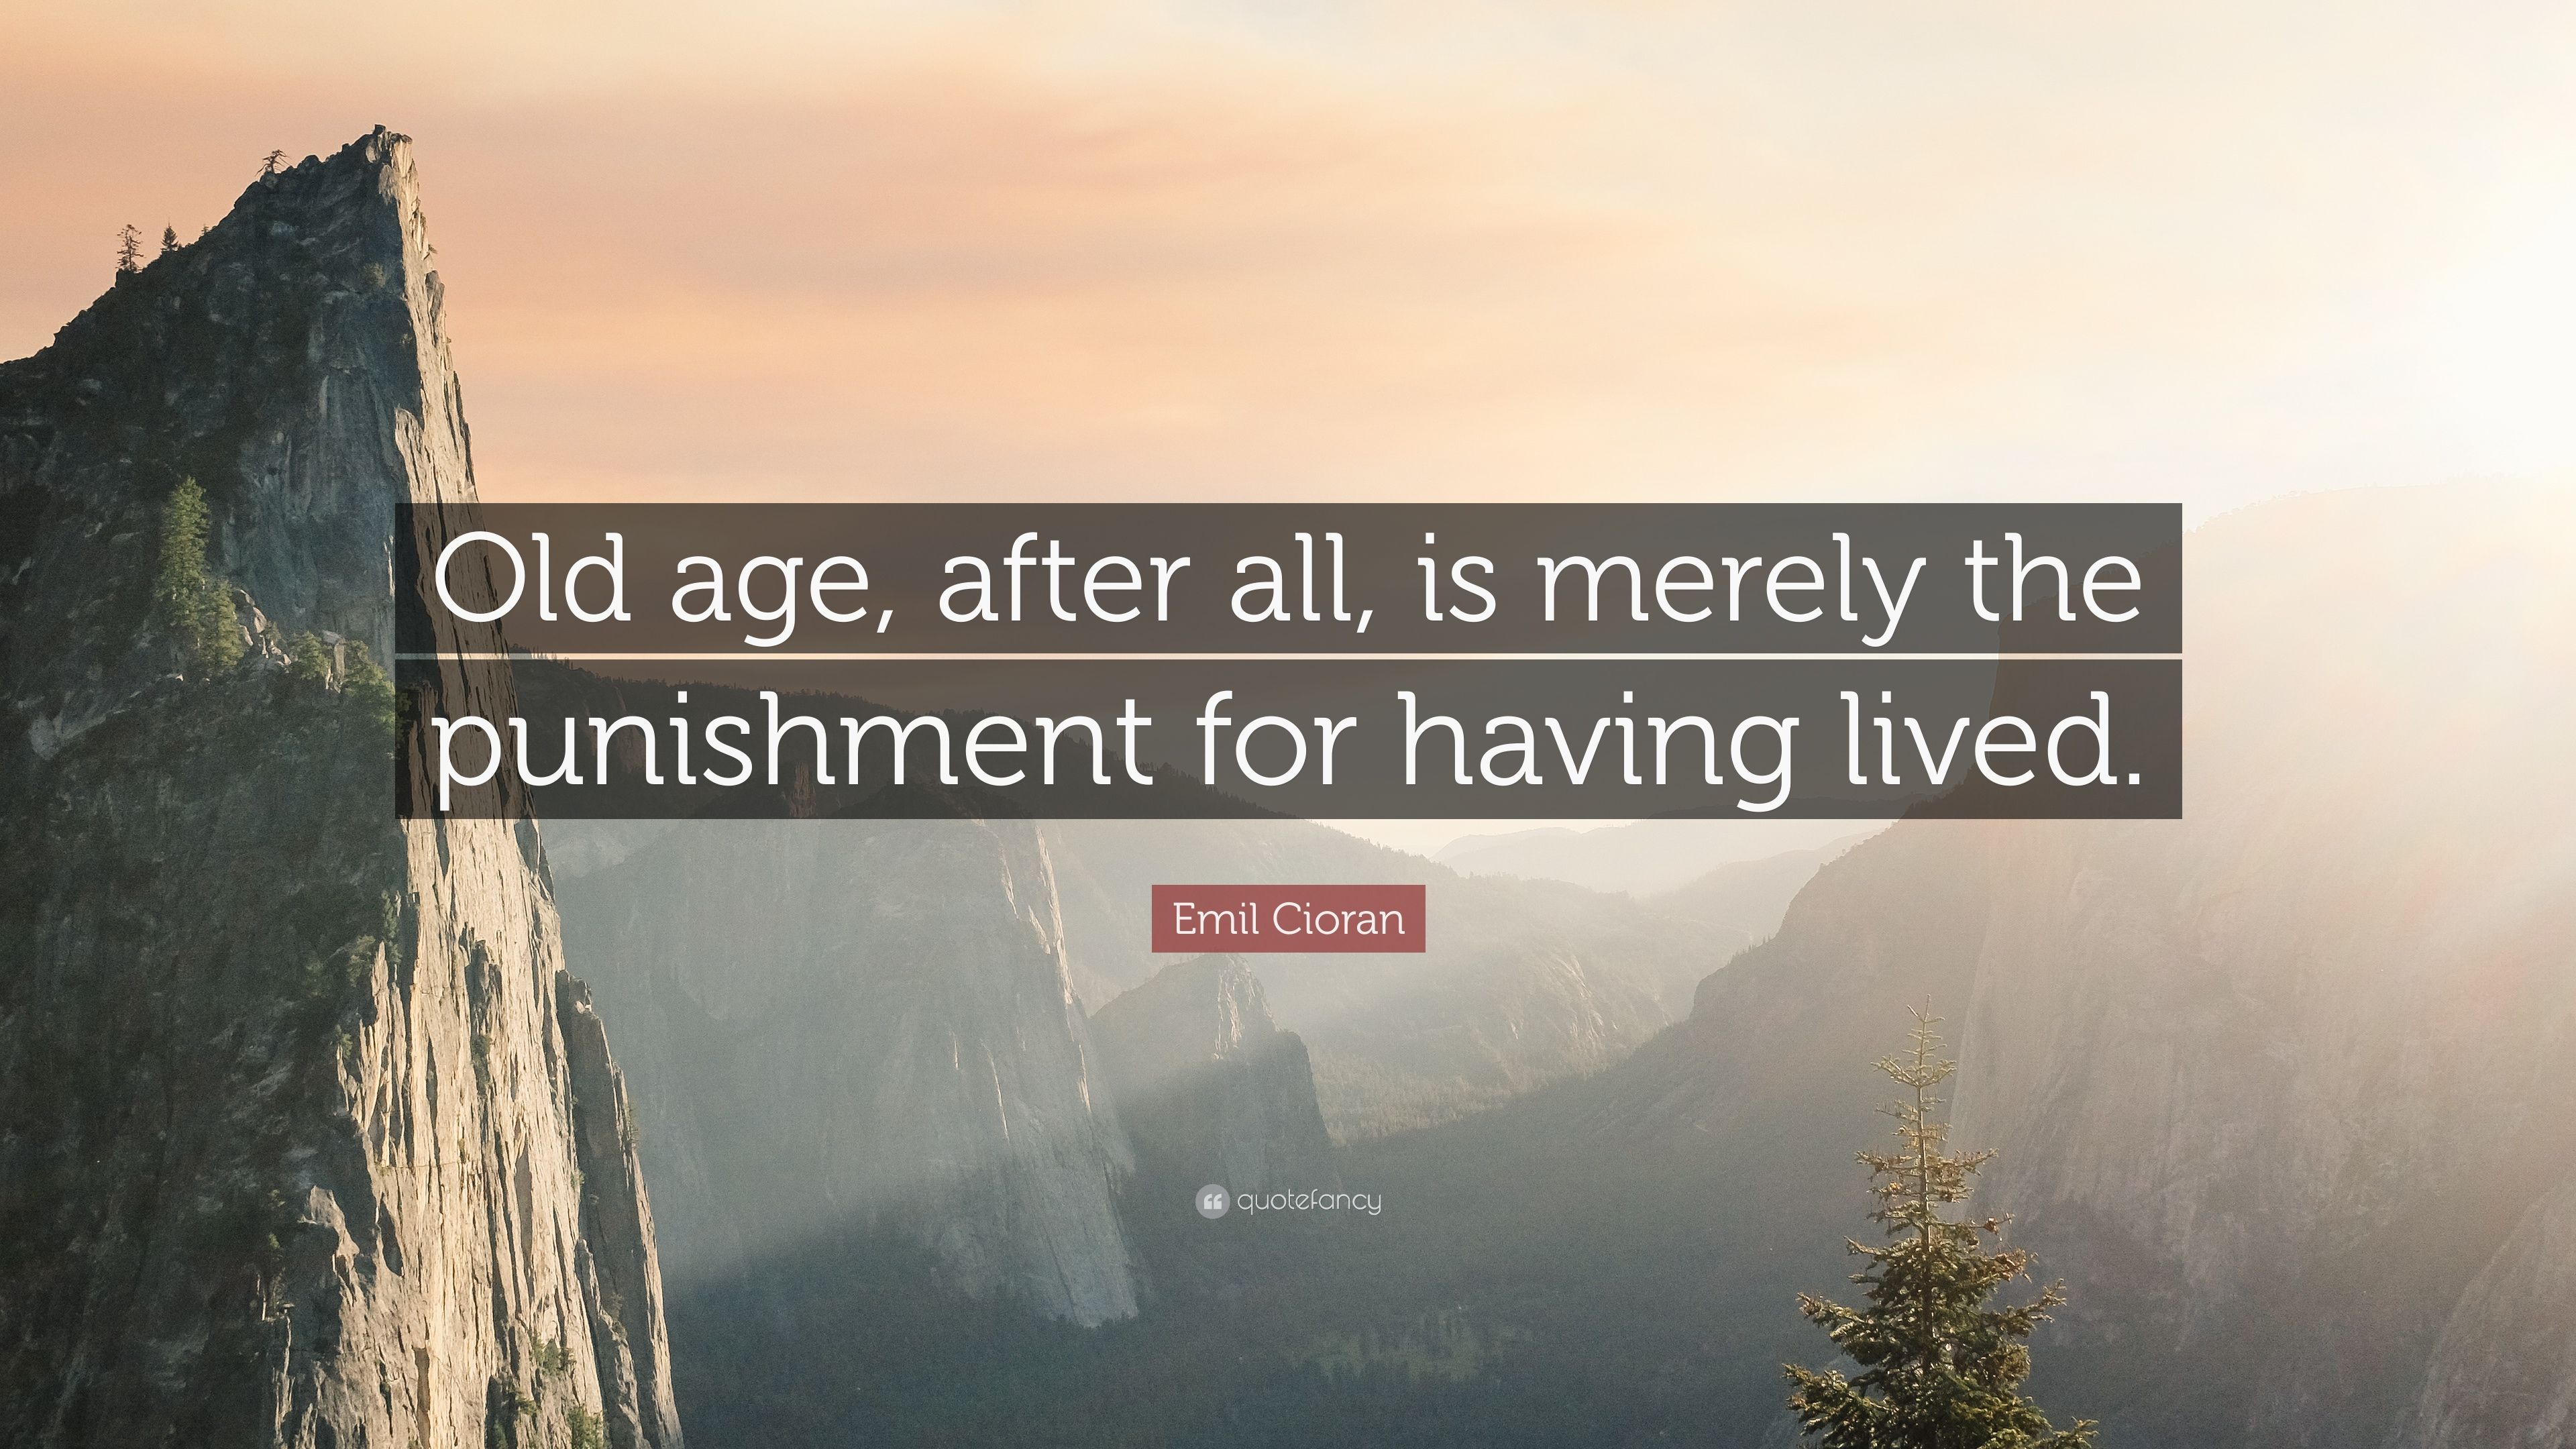 Emil Cioran Quote: “Old age, after all, is merely the punishment for having lived.” (6 wallpaper)